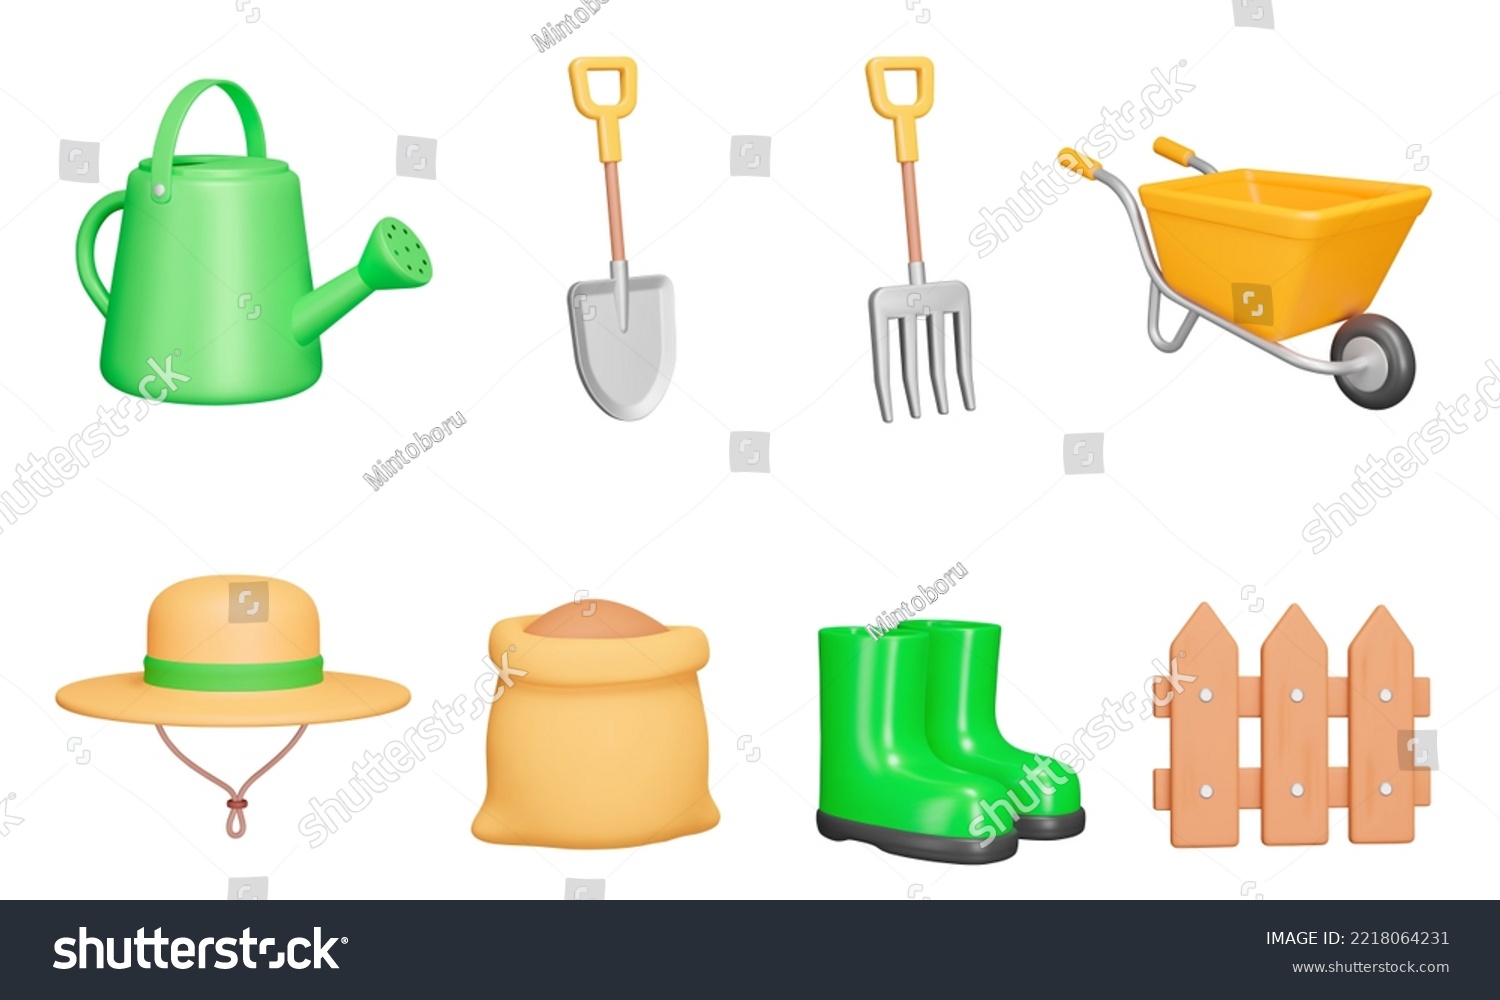 Gardening 3d icon set. Tools, equipment for garden and vegetable garden care. Spout, shovel, pitchfork, wheelbarrow, hat, bag, boots, fence. Isolated icons, objects on transparent background #2218064231